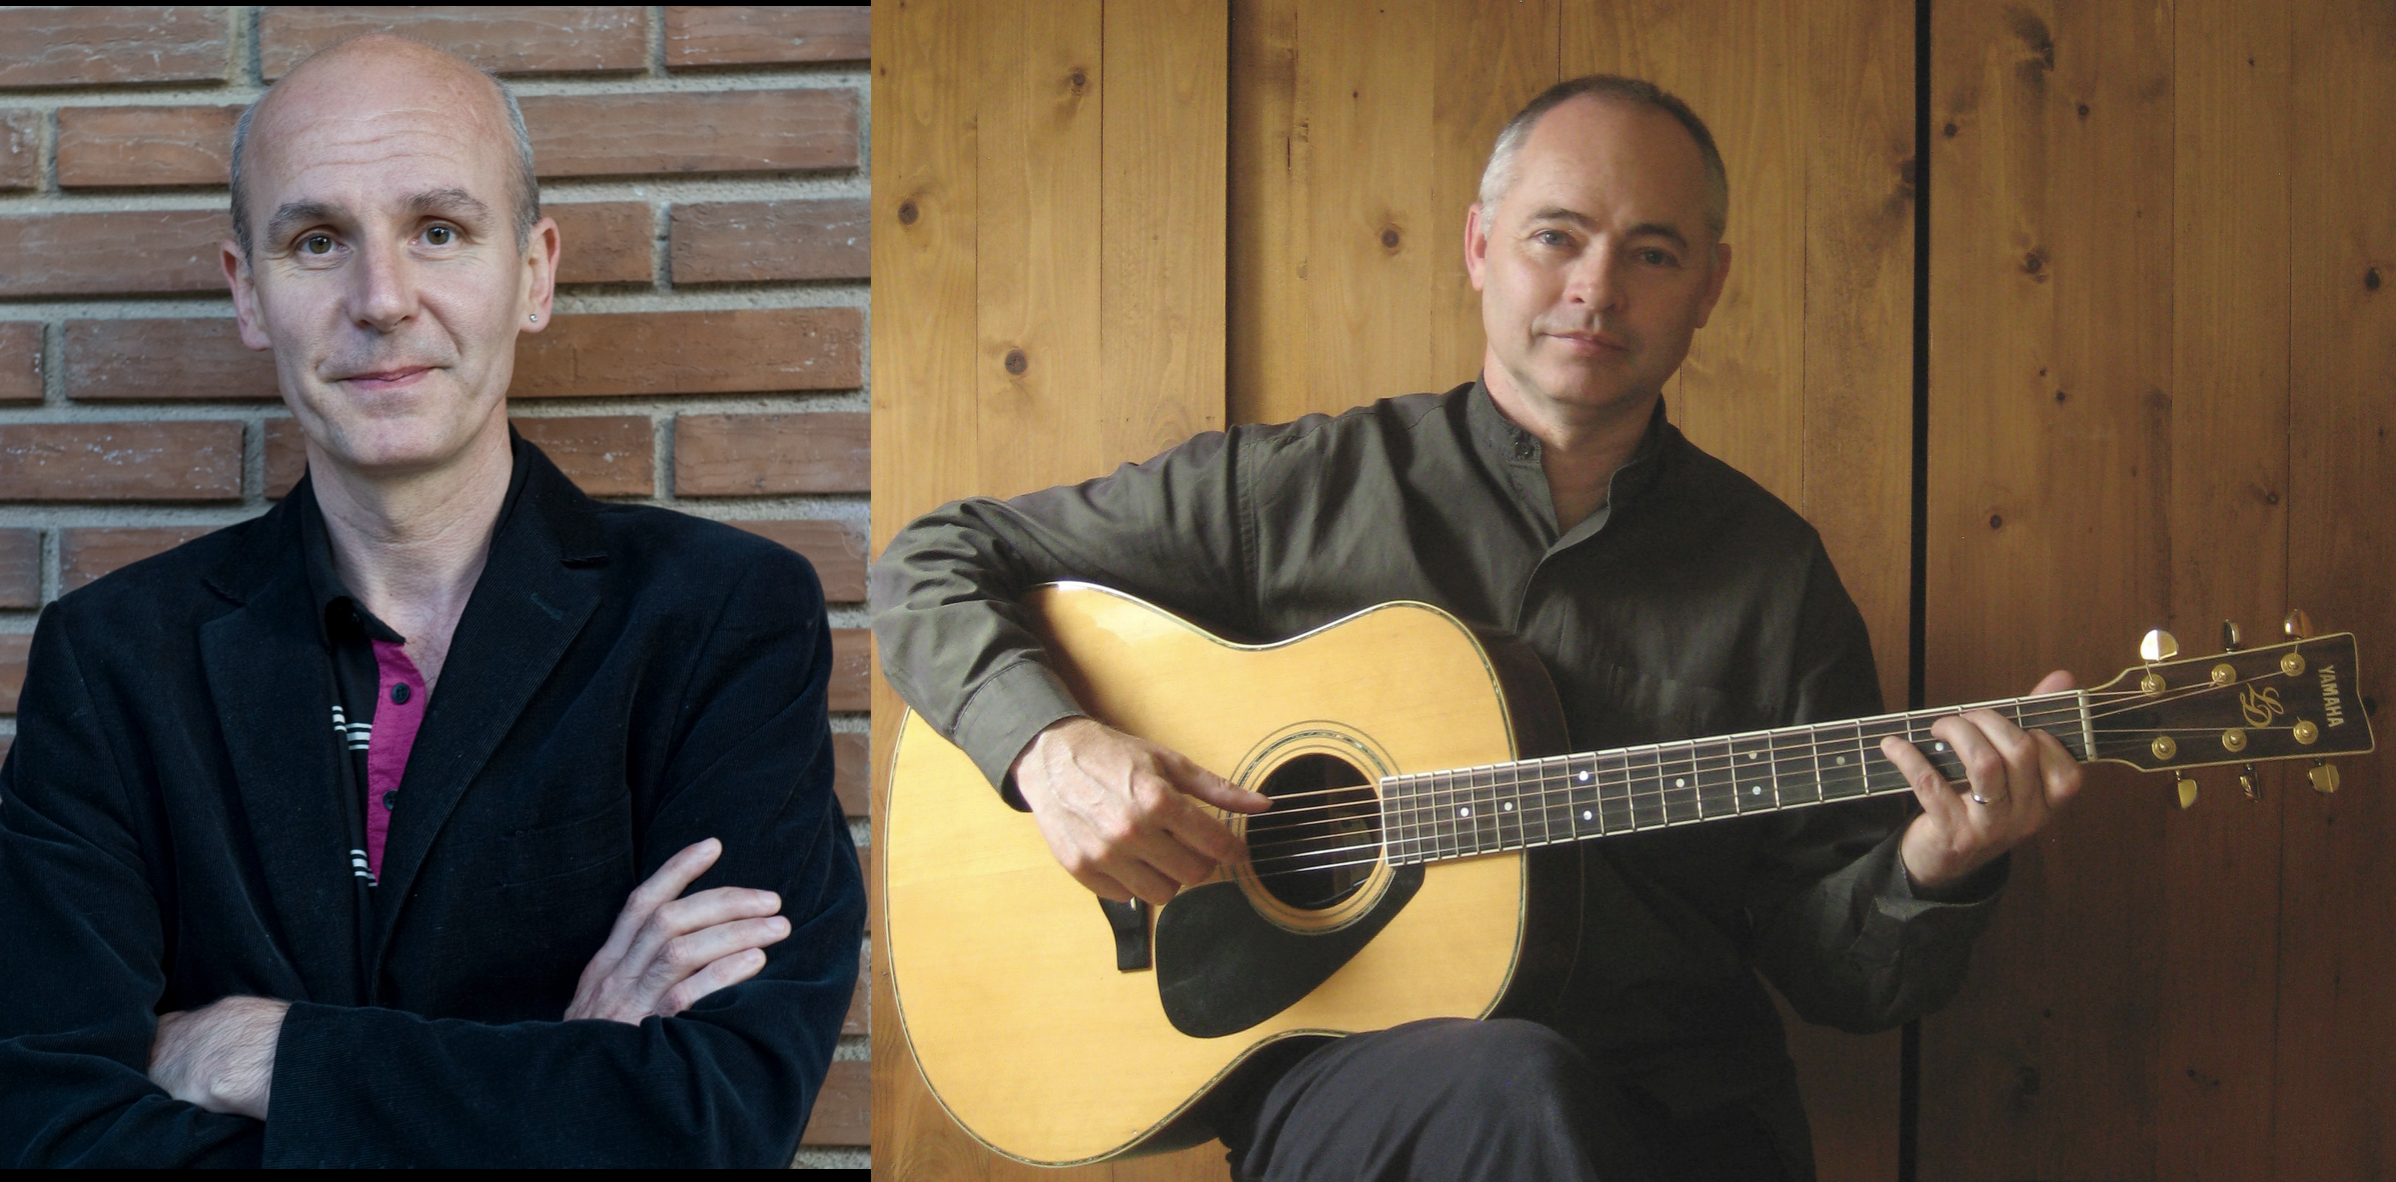 Photo of Cormac Breatnach with arms folded and photo of Martin Dunlea with guitar